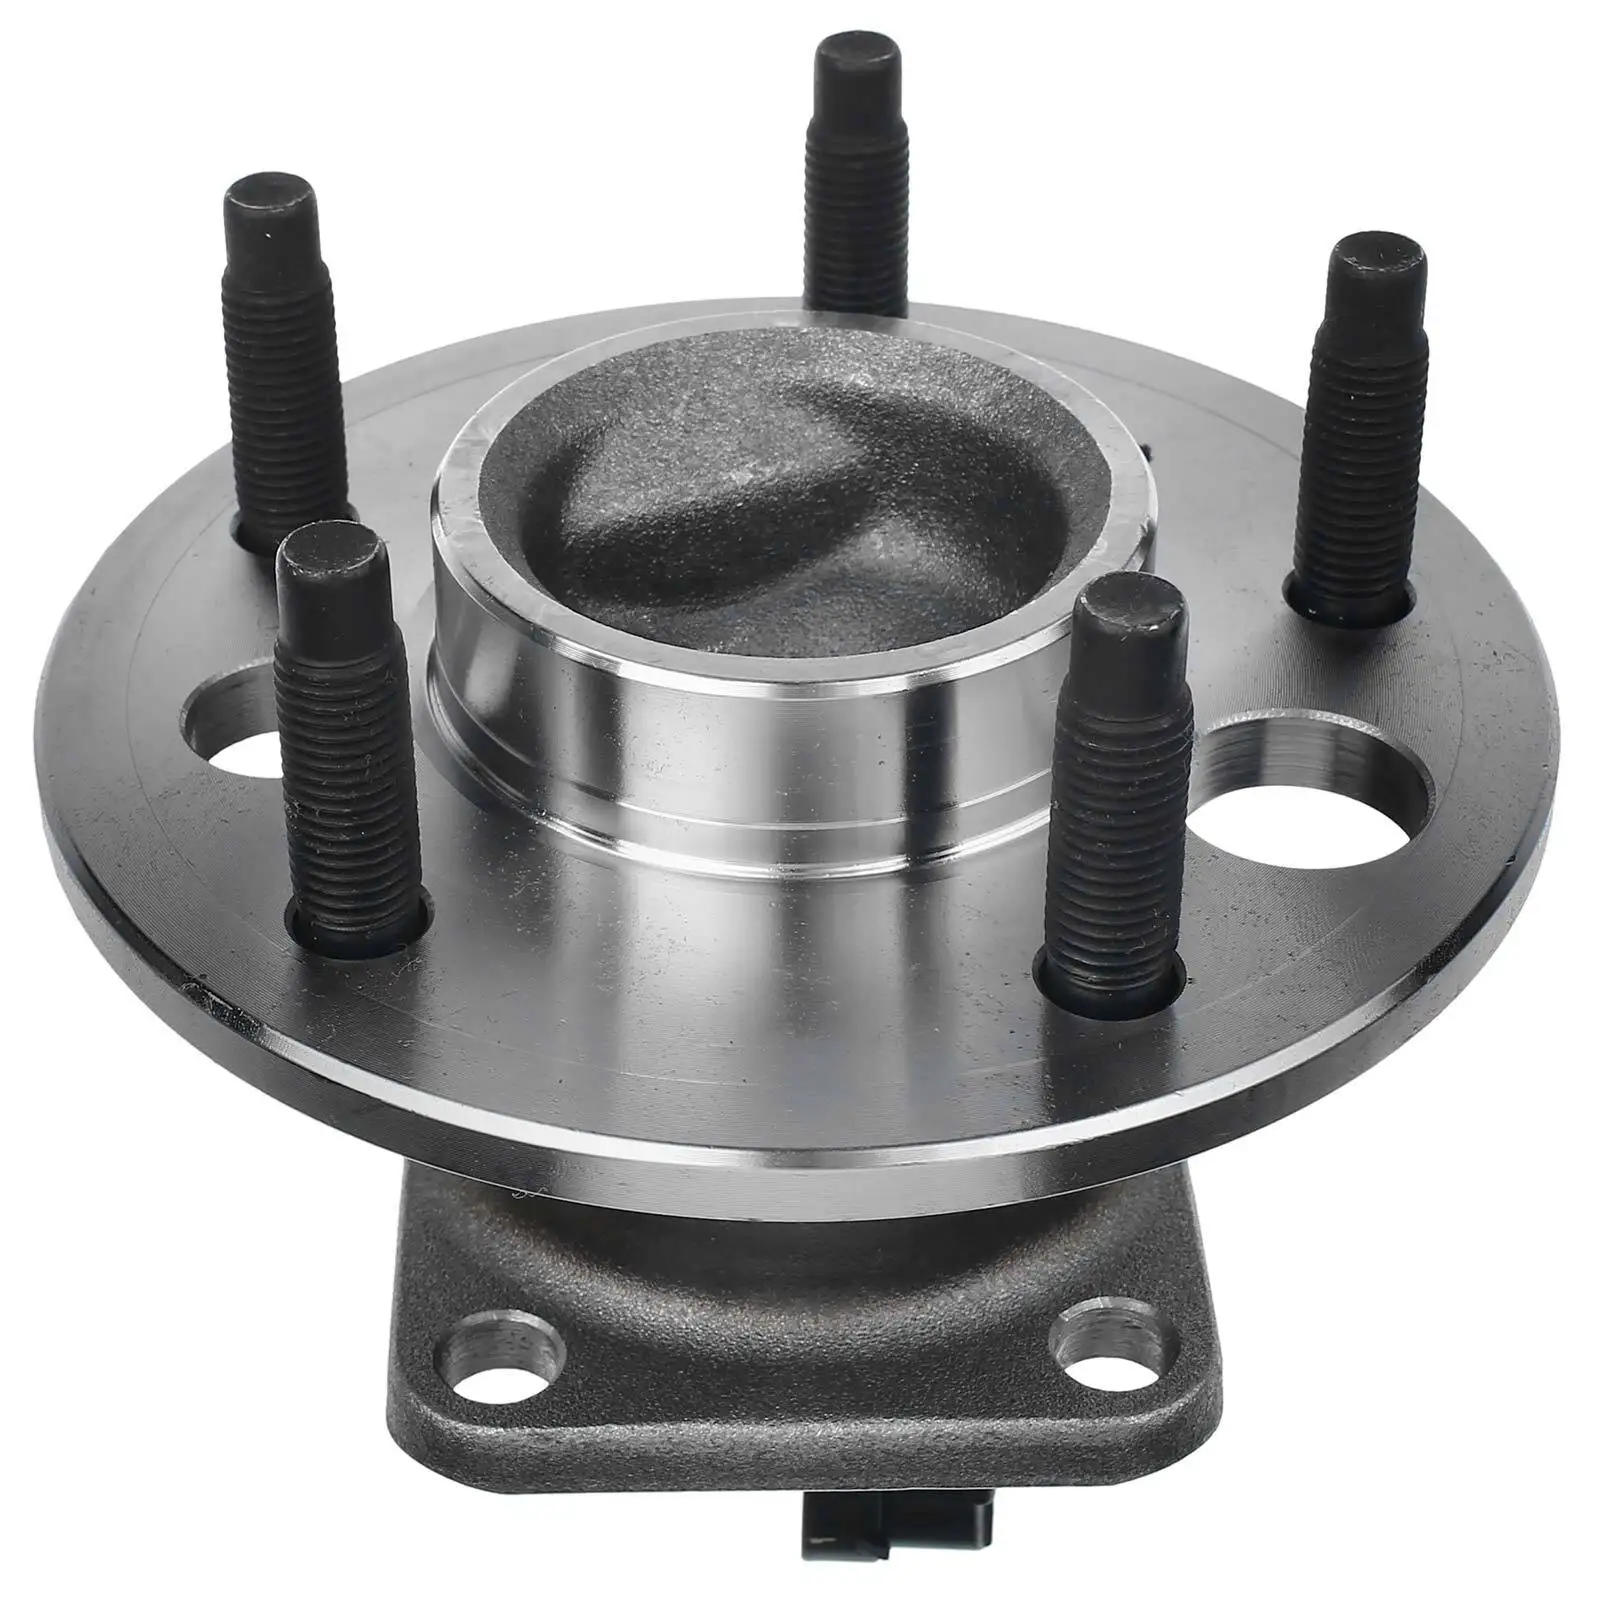 

A3 Wholesales 2x Rear LH & RH Wheel Hub Bearing Assembly for Chevy Malibu Cadillac Buick Olds